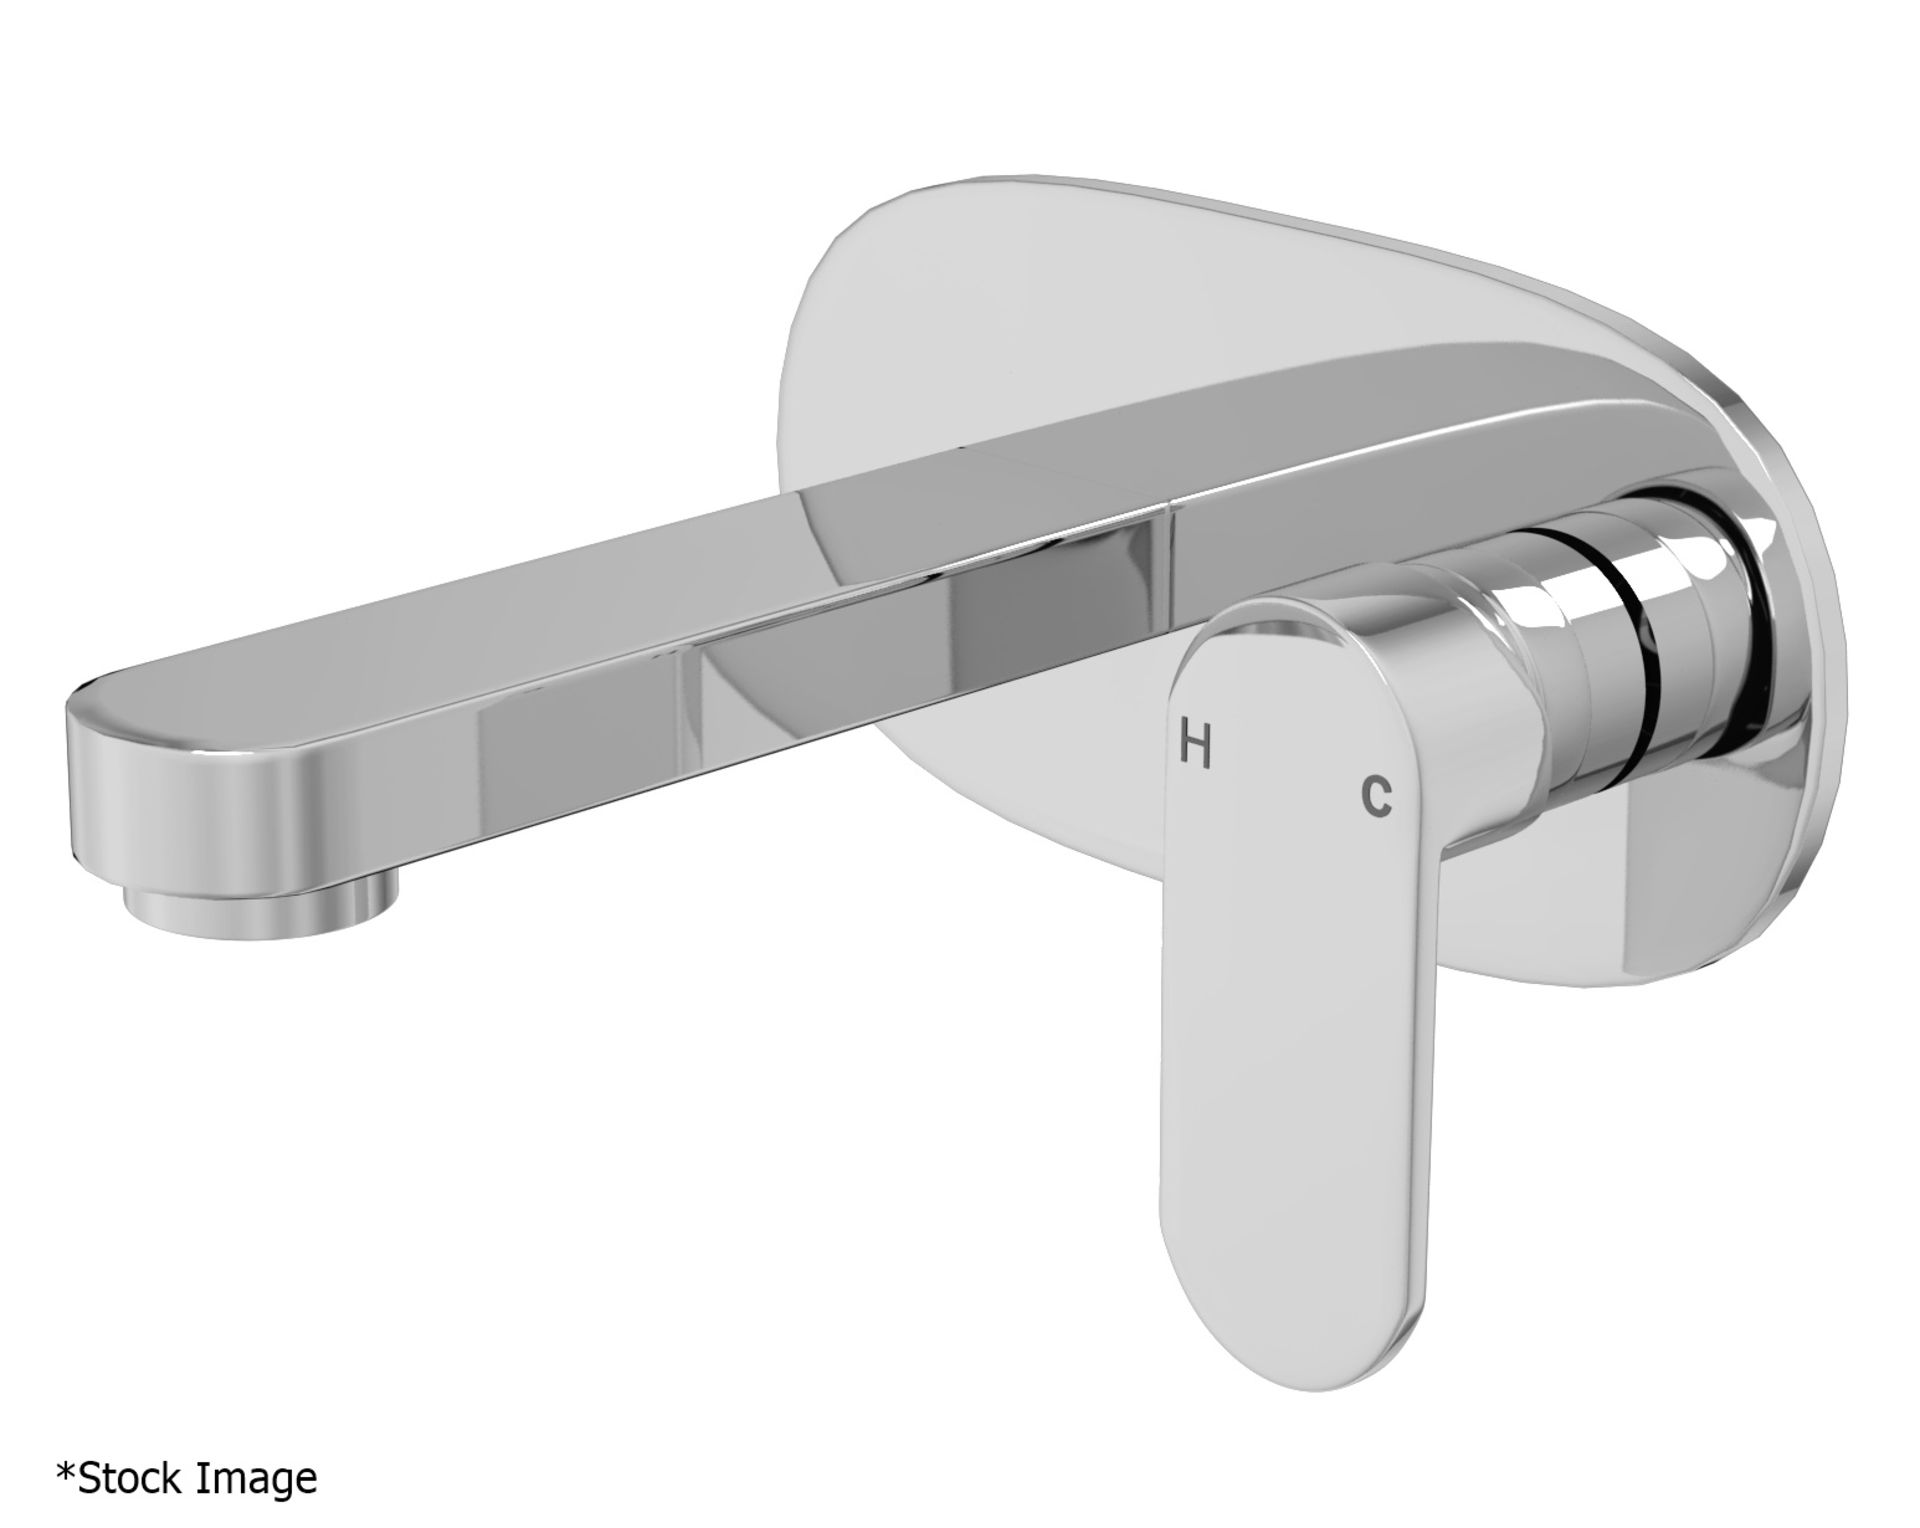 1 x CASSELLIE' Filo' Wall Mounted Basin Mixer Tap In Chrome - Ref: FIL001 - New & Boxed Stock - - Image 2 of 3